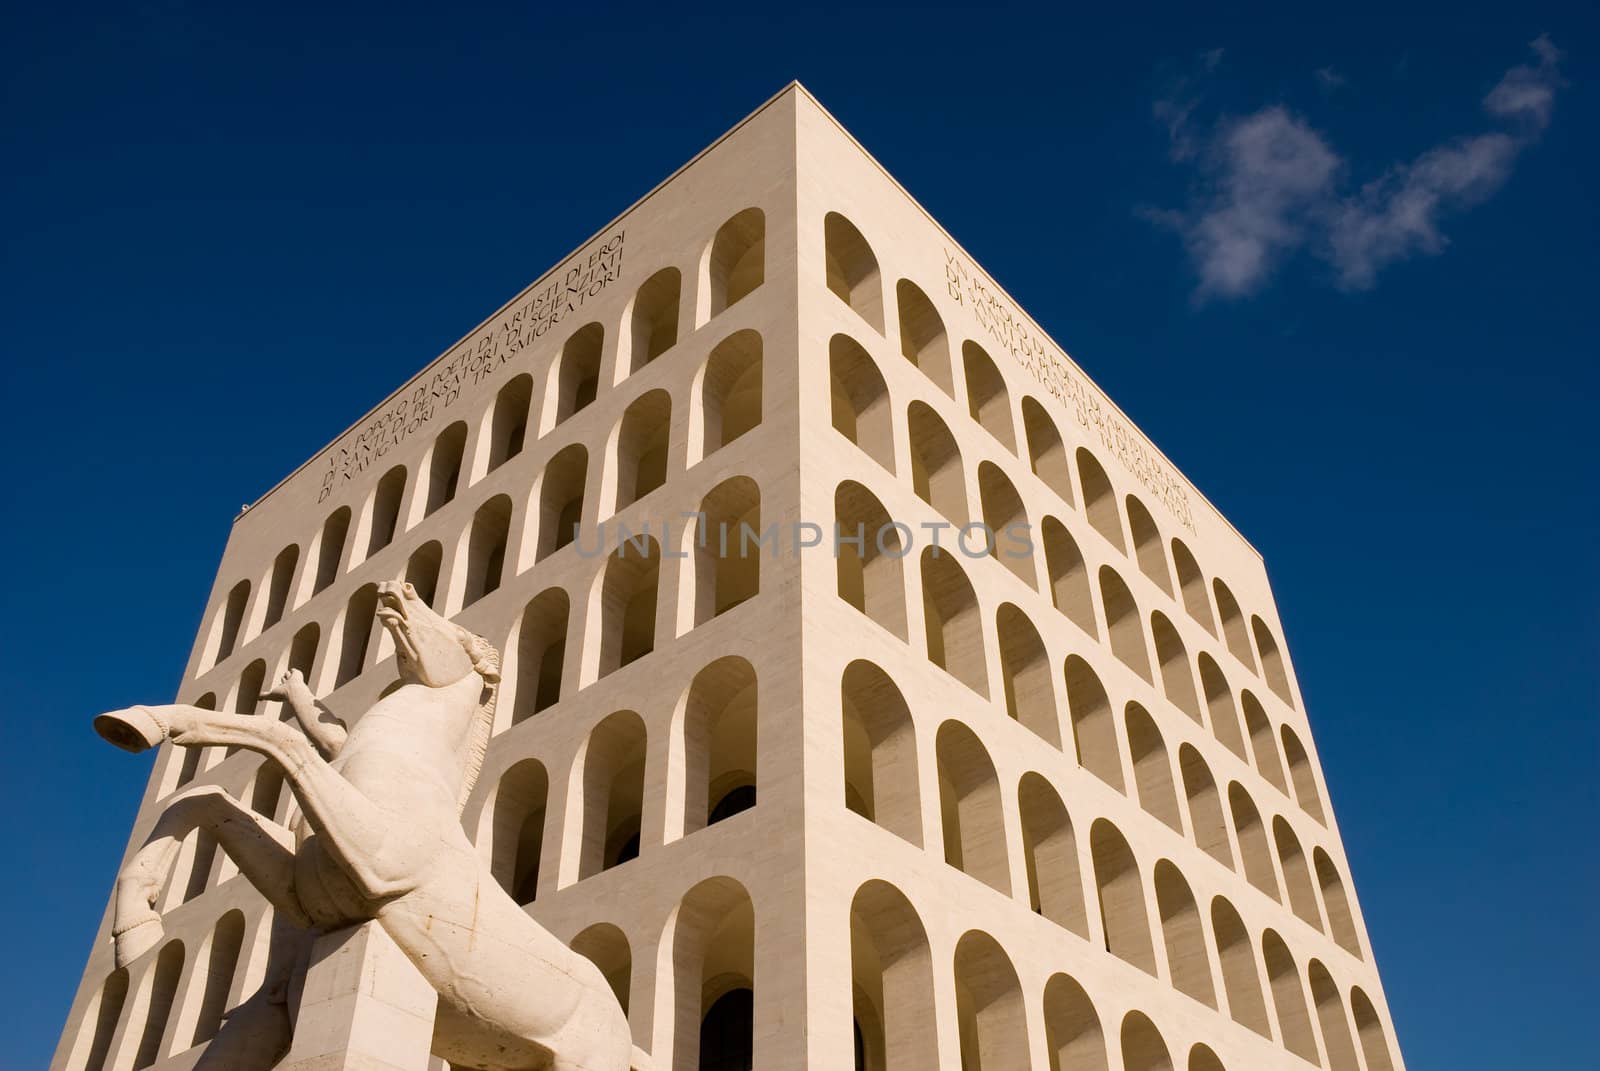 Mussolini time architecture building in Rome, Italy. by 300pixel